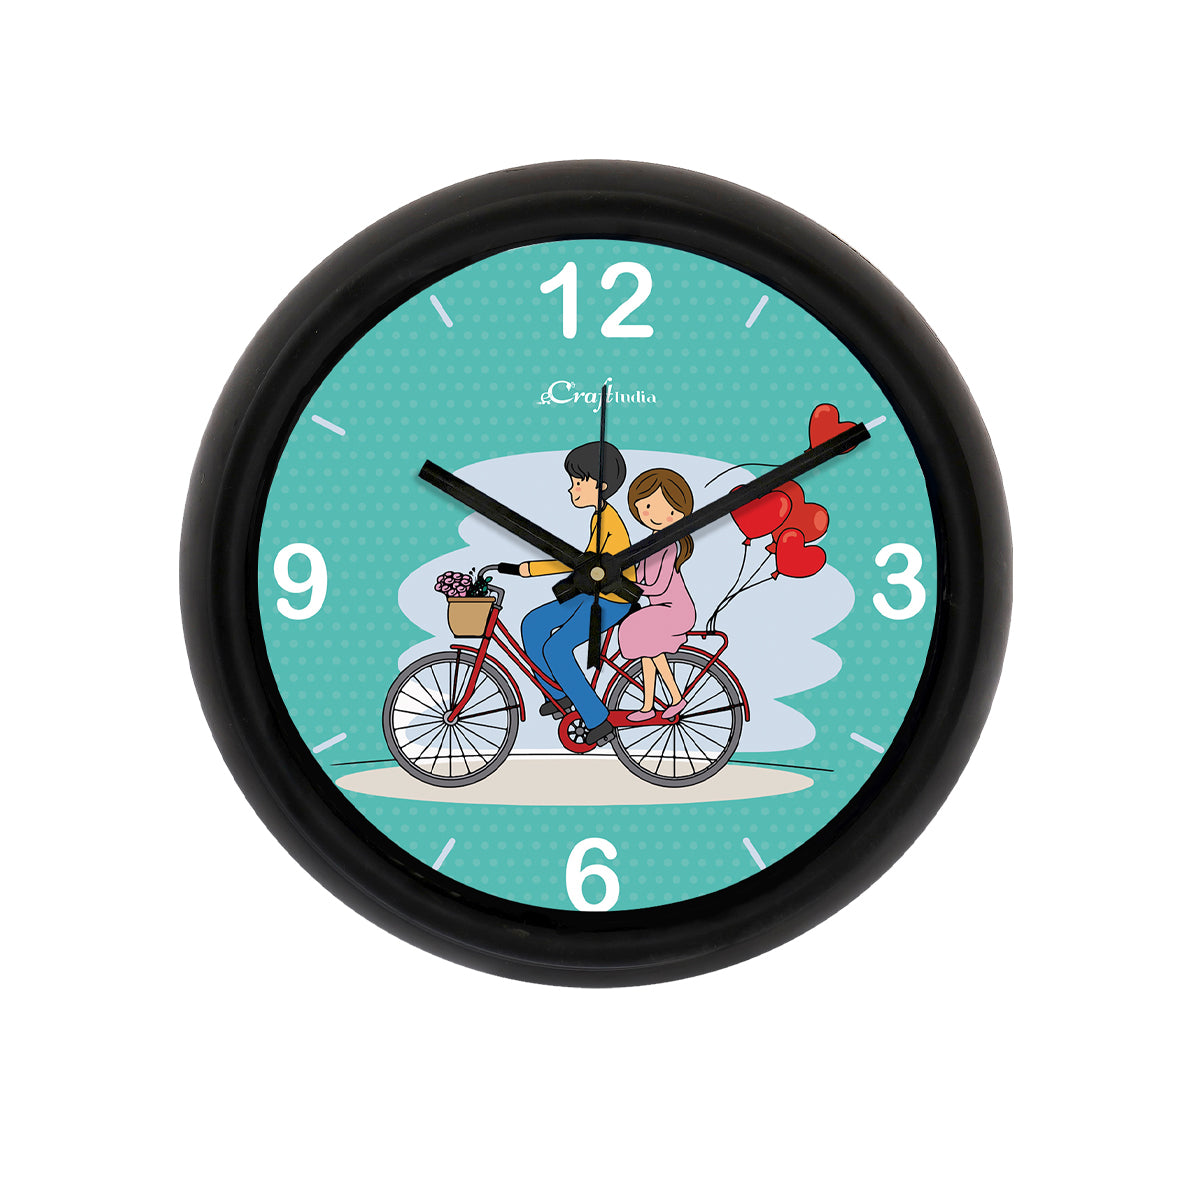 "Couple in Love Riding Bicycle" Blue Designer Round Analog Black Wall Clock